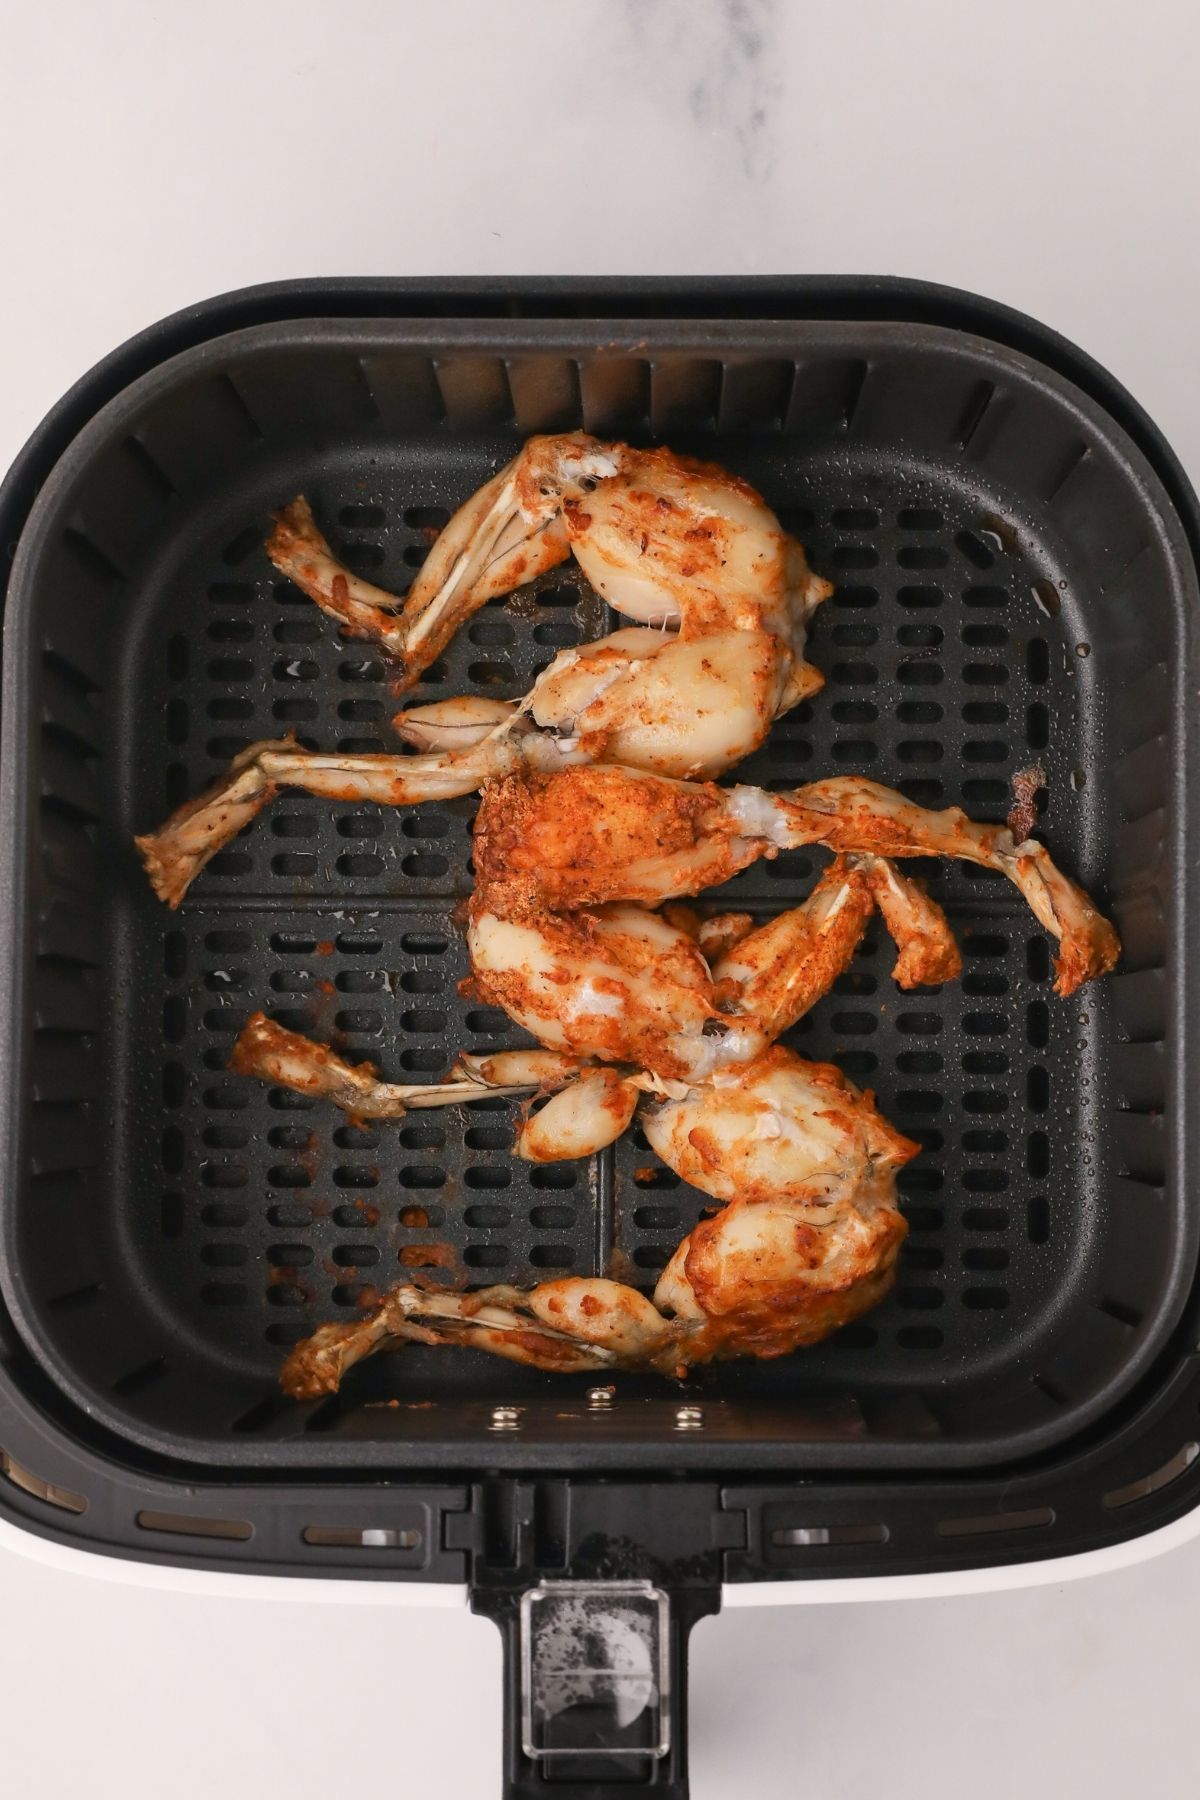 Cooked frog legs in the air fryer basket